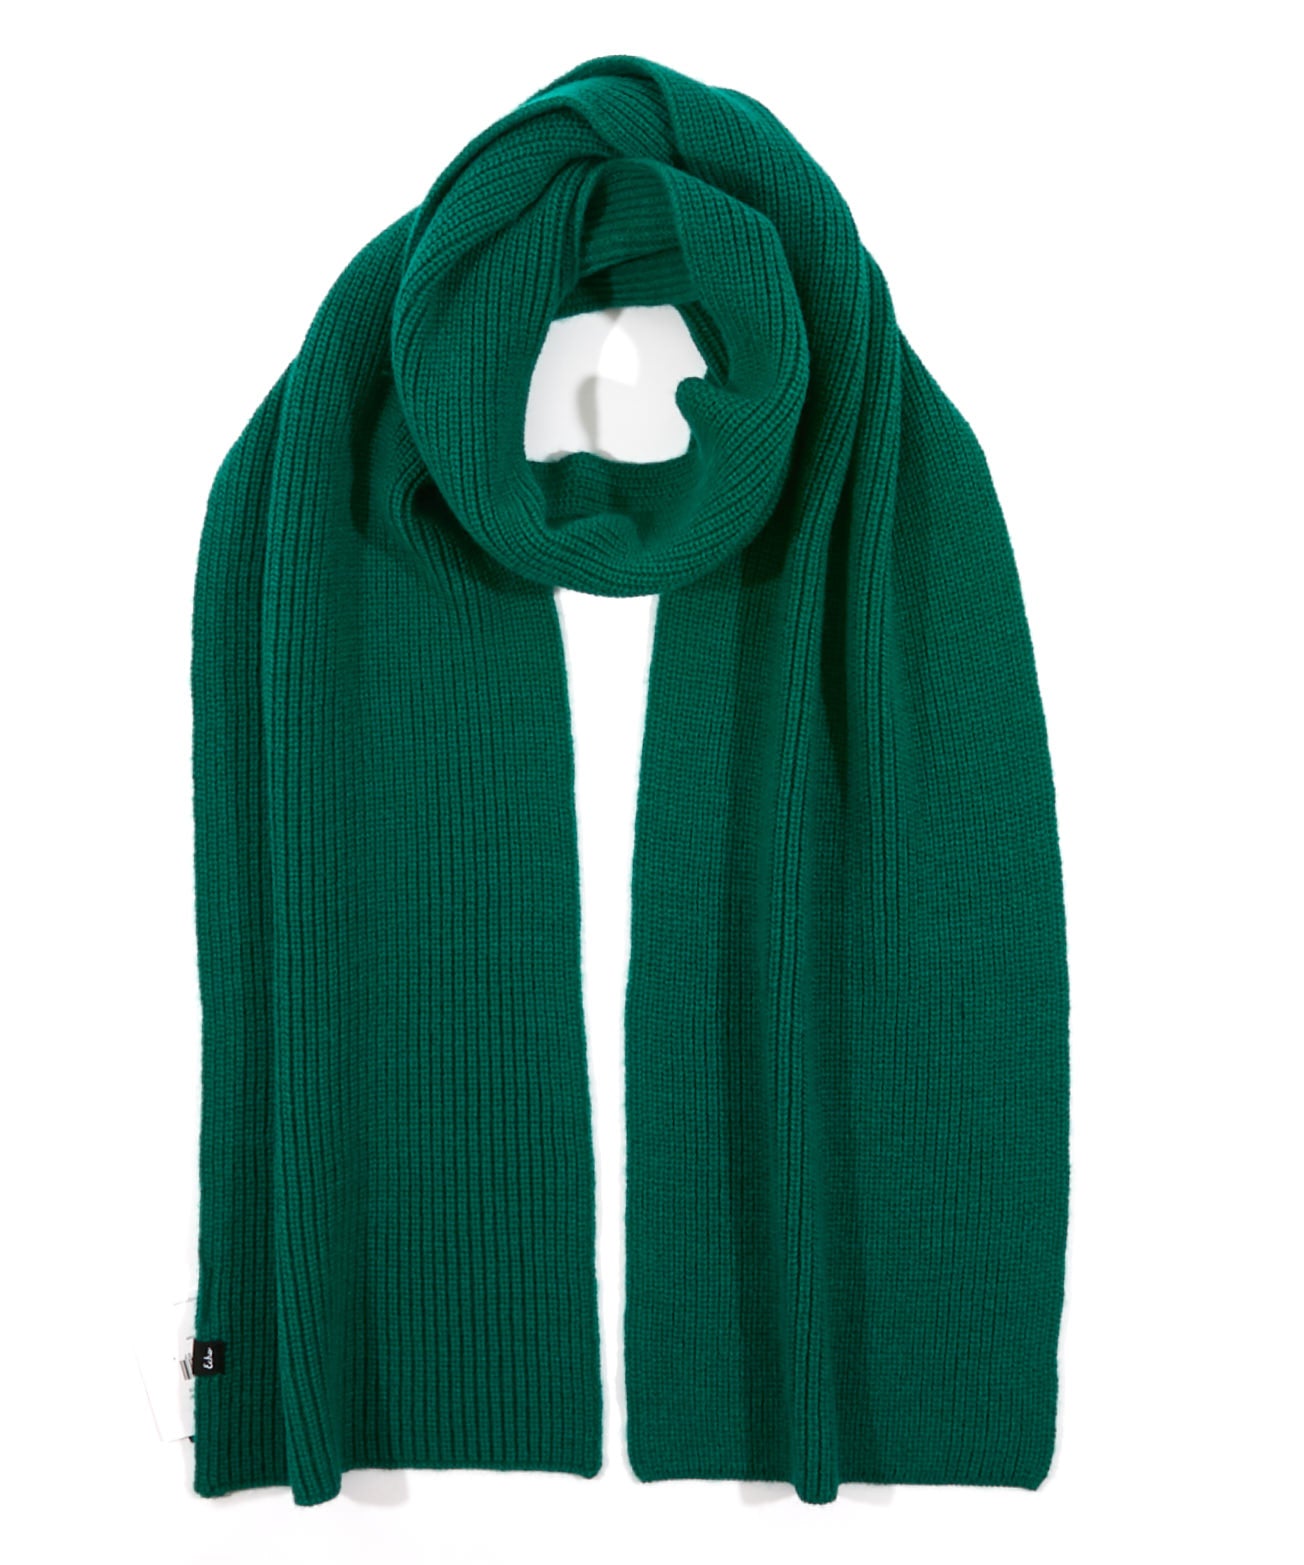 Radiant Scarf in color Emerald